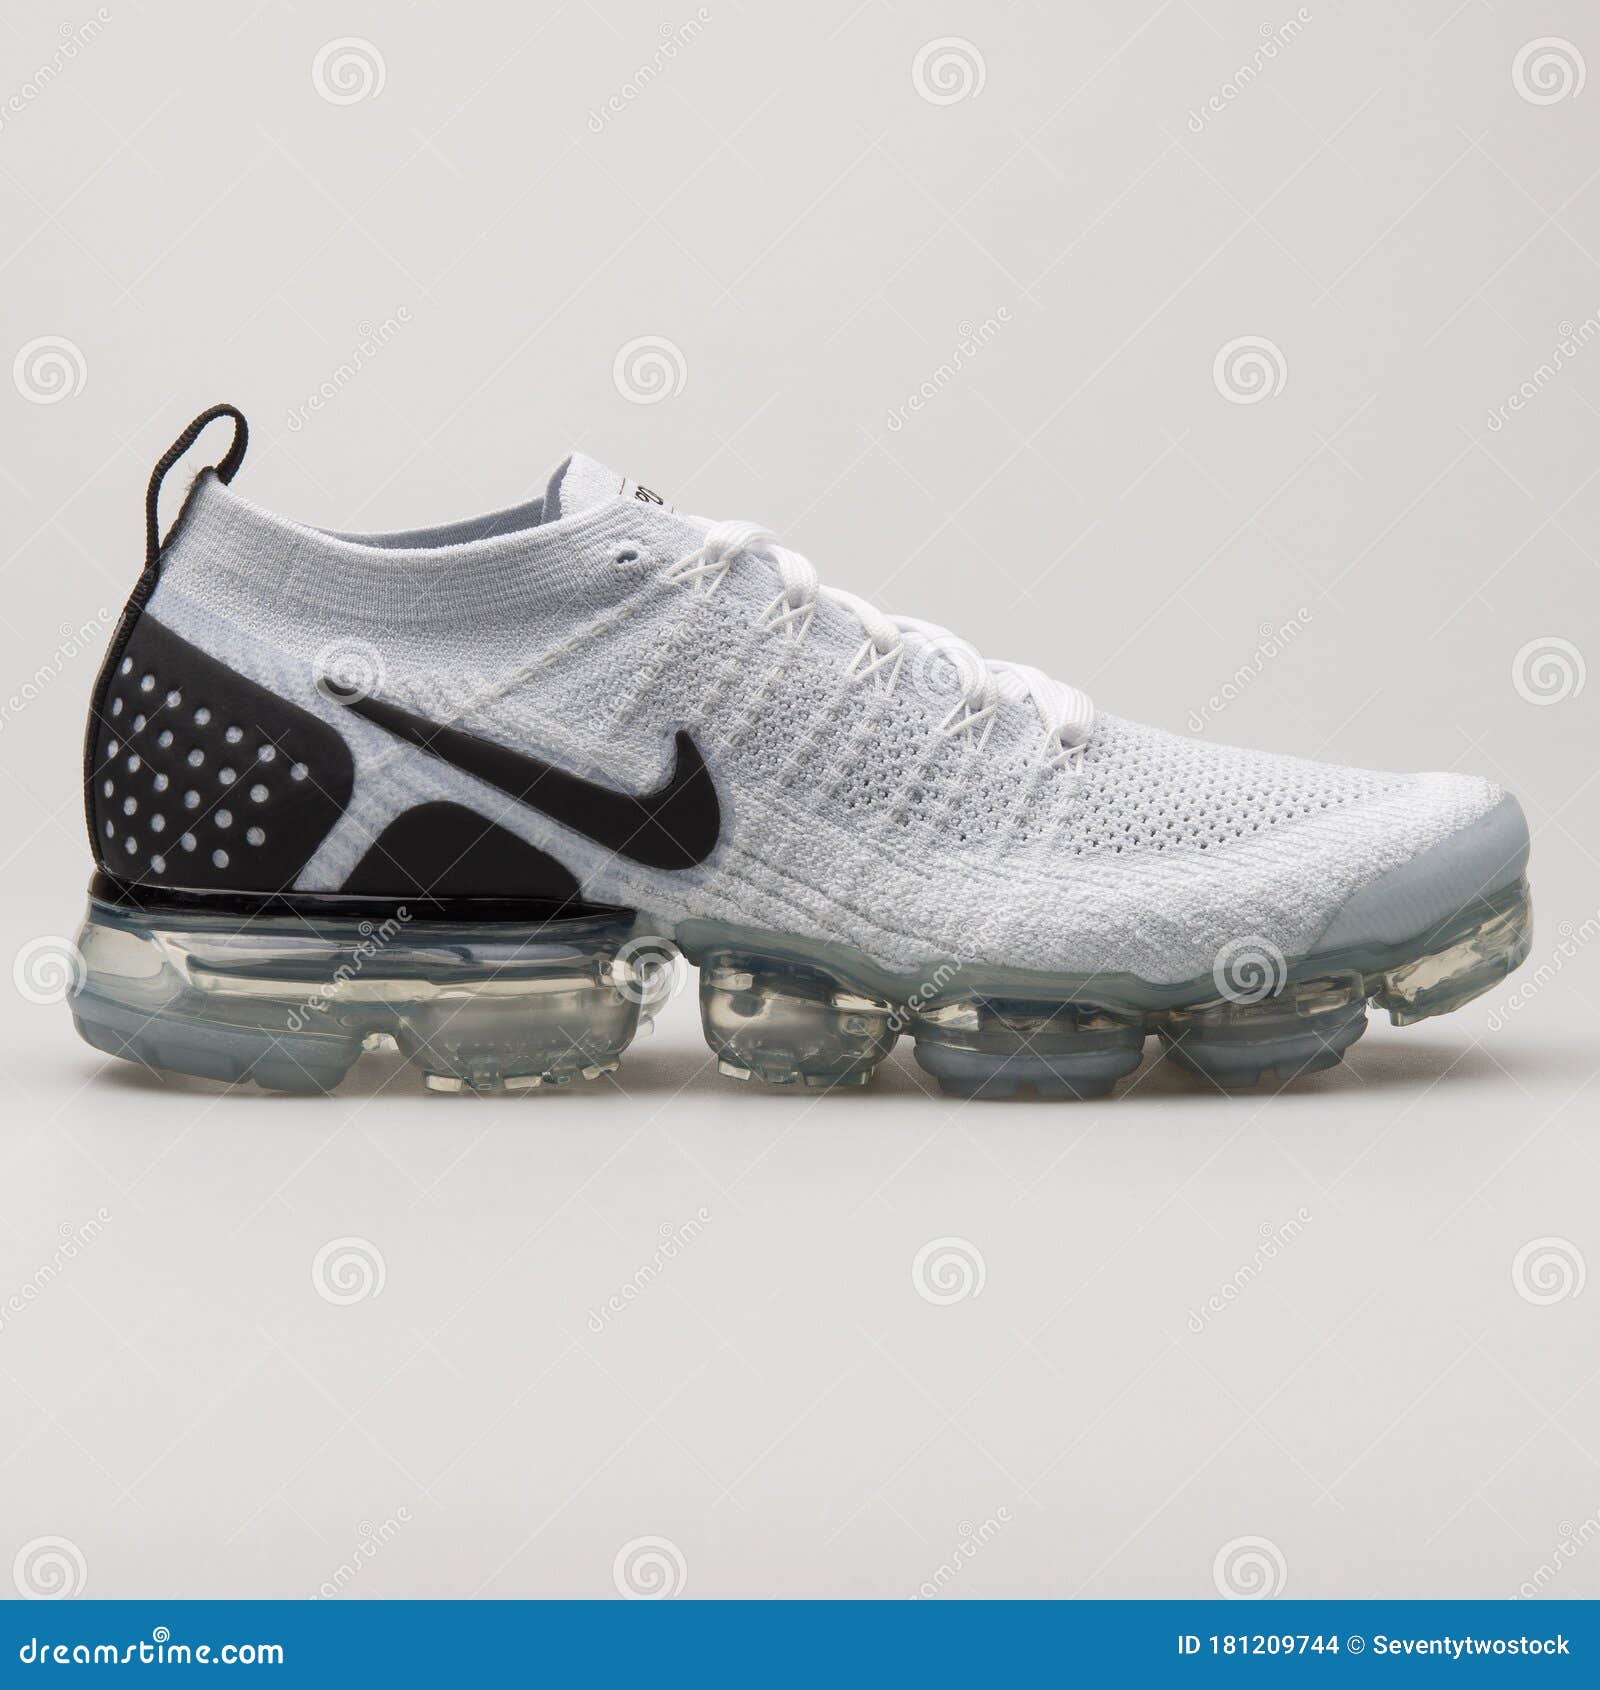 Nike Air Vapormax Flyknit 2 White and Black Sneaker Editorial Stock Image -  Image of kicks, background: 181209744